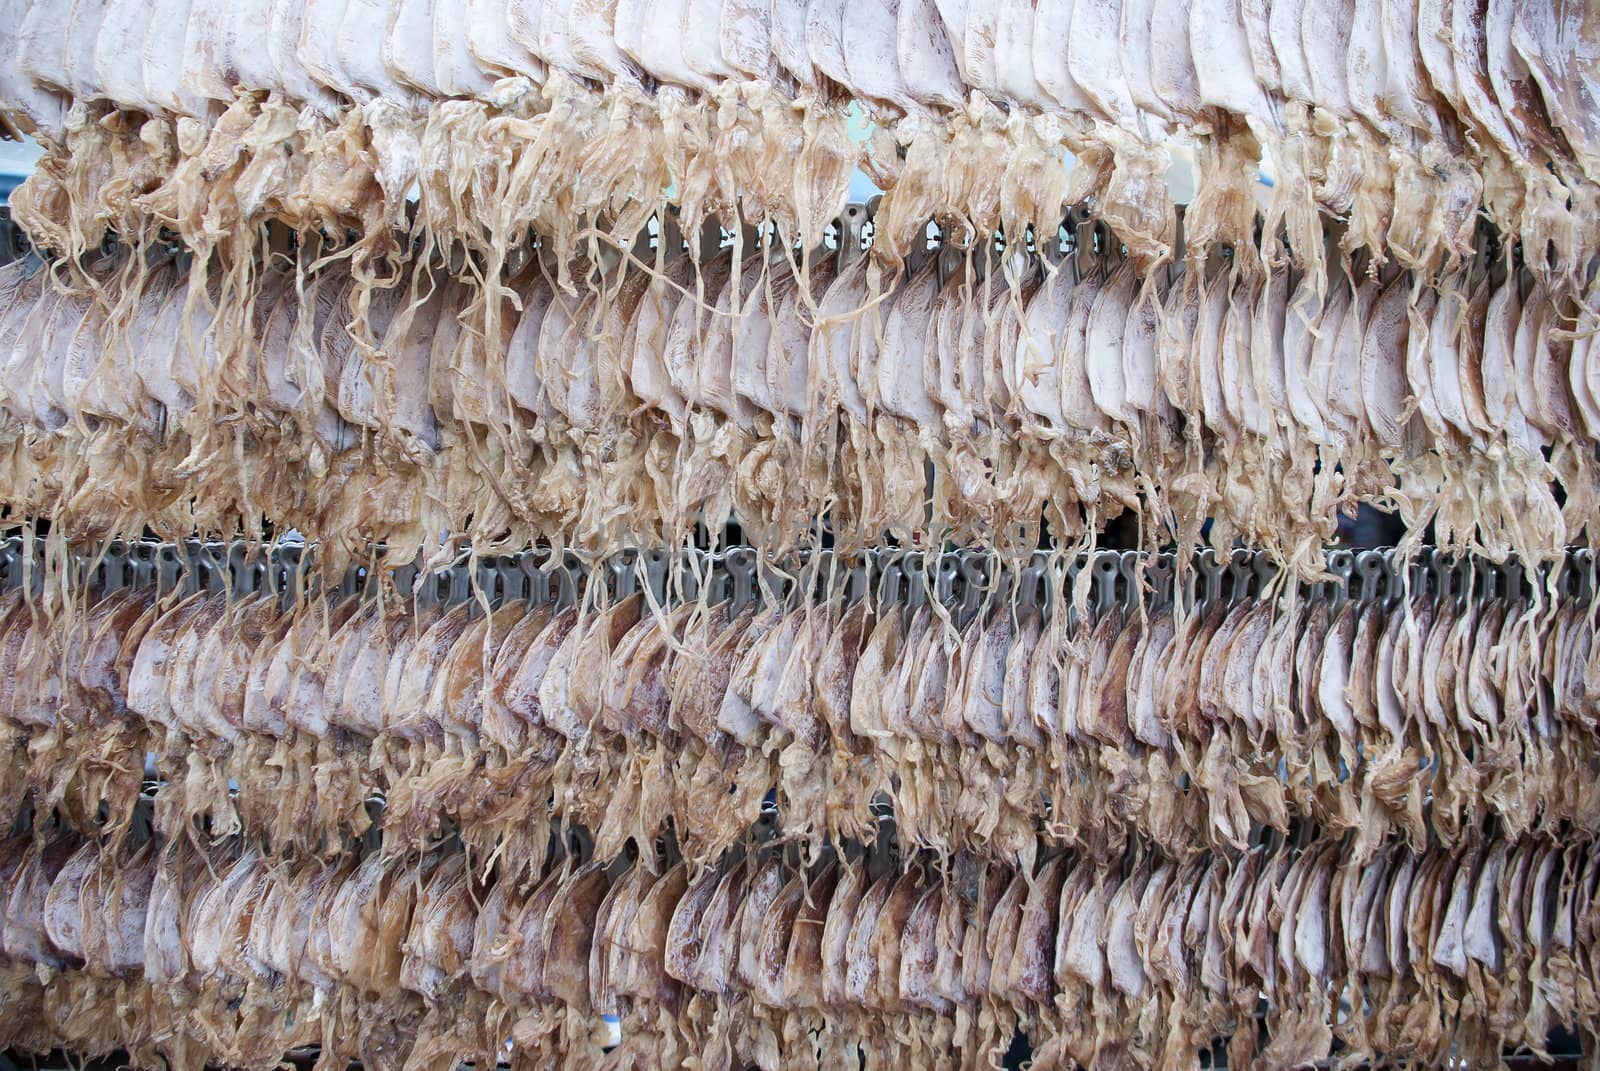 Rows of dried squid for sale in Thailand